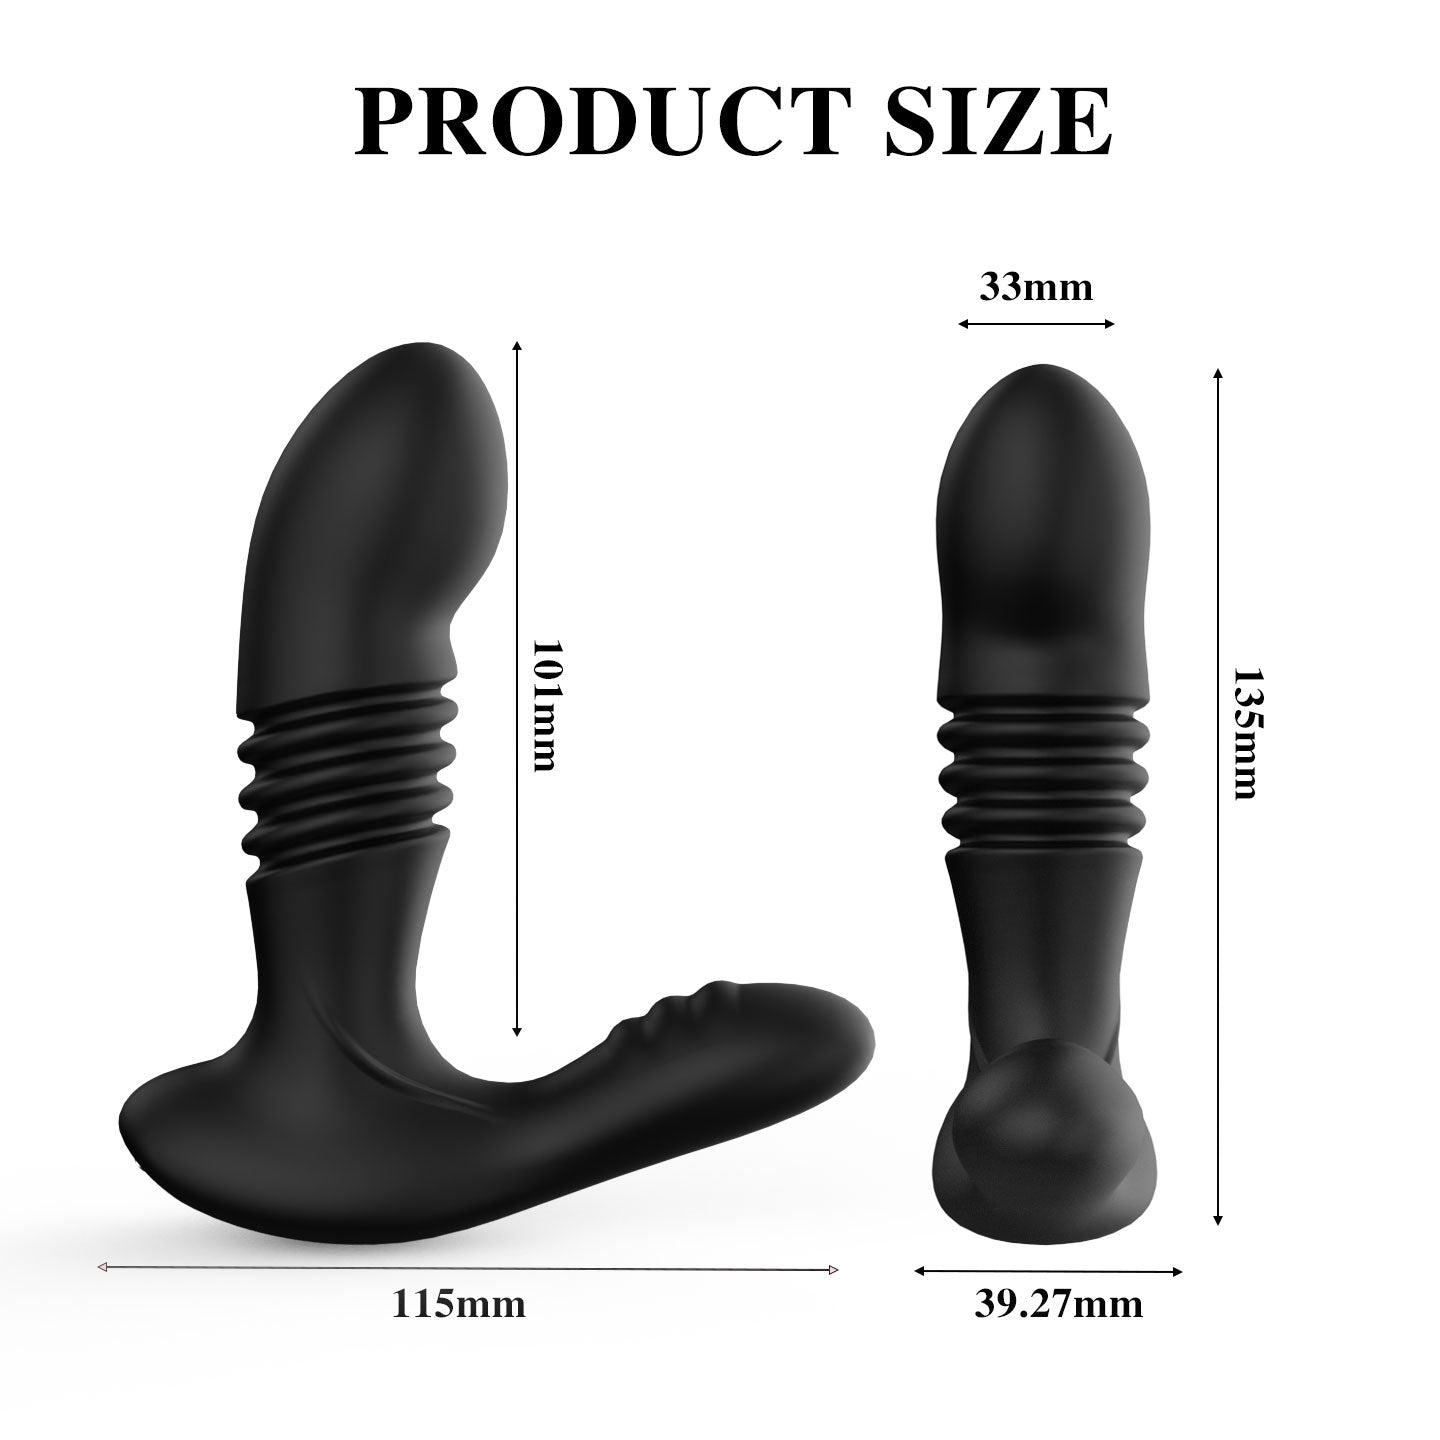 Anal Plug 12 Vibration Frequencies Retractable Prostate Massager